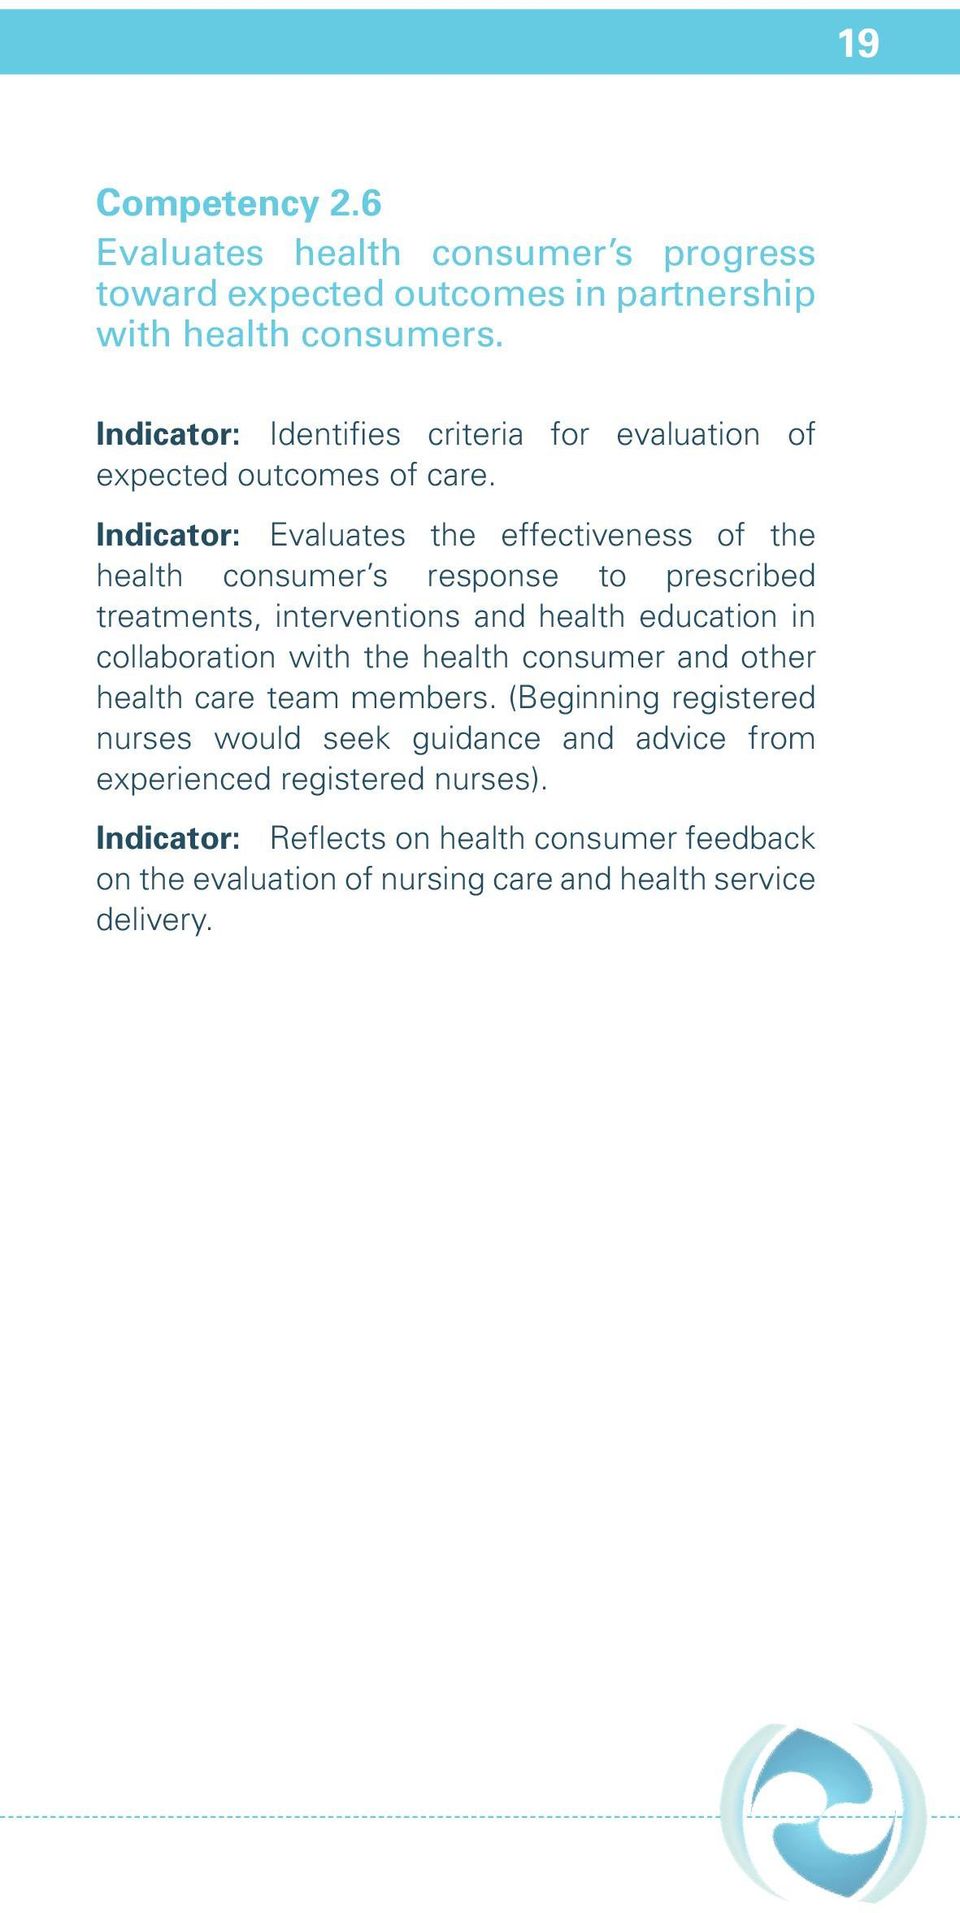 Indicator: Evaluates the effectiveness of the health consumer s response to prescribed treatments, interventions and health education in collaboration